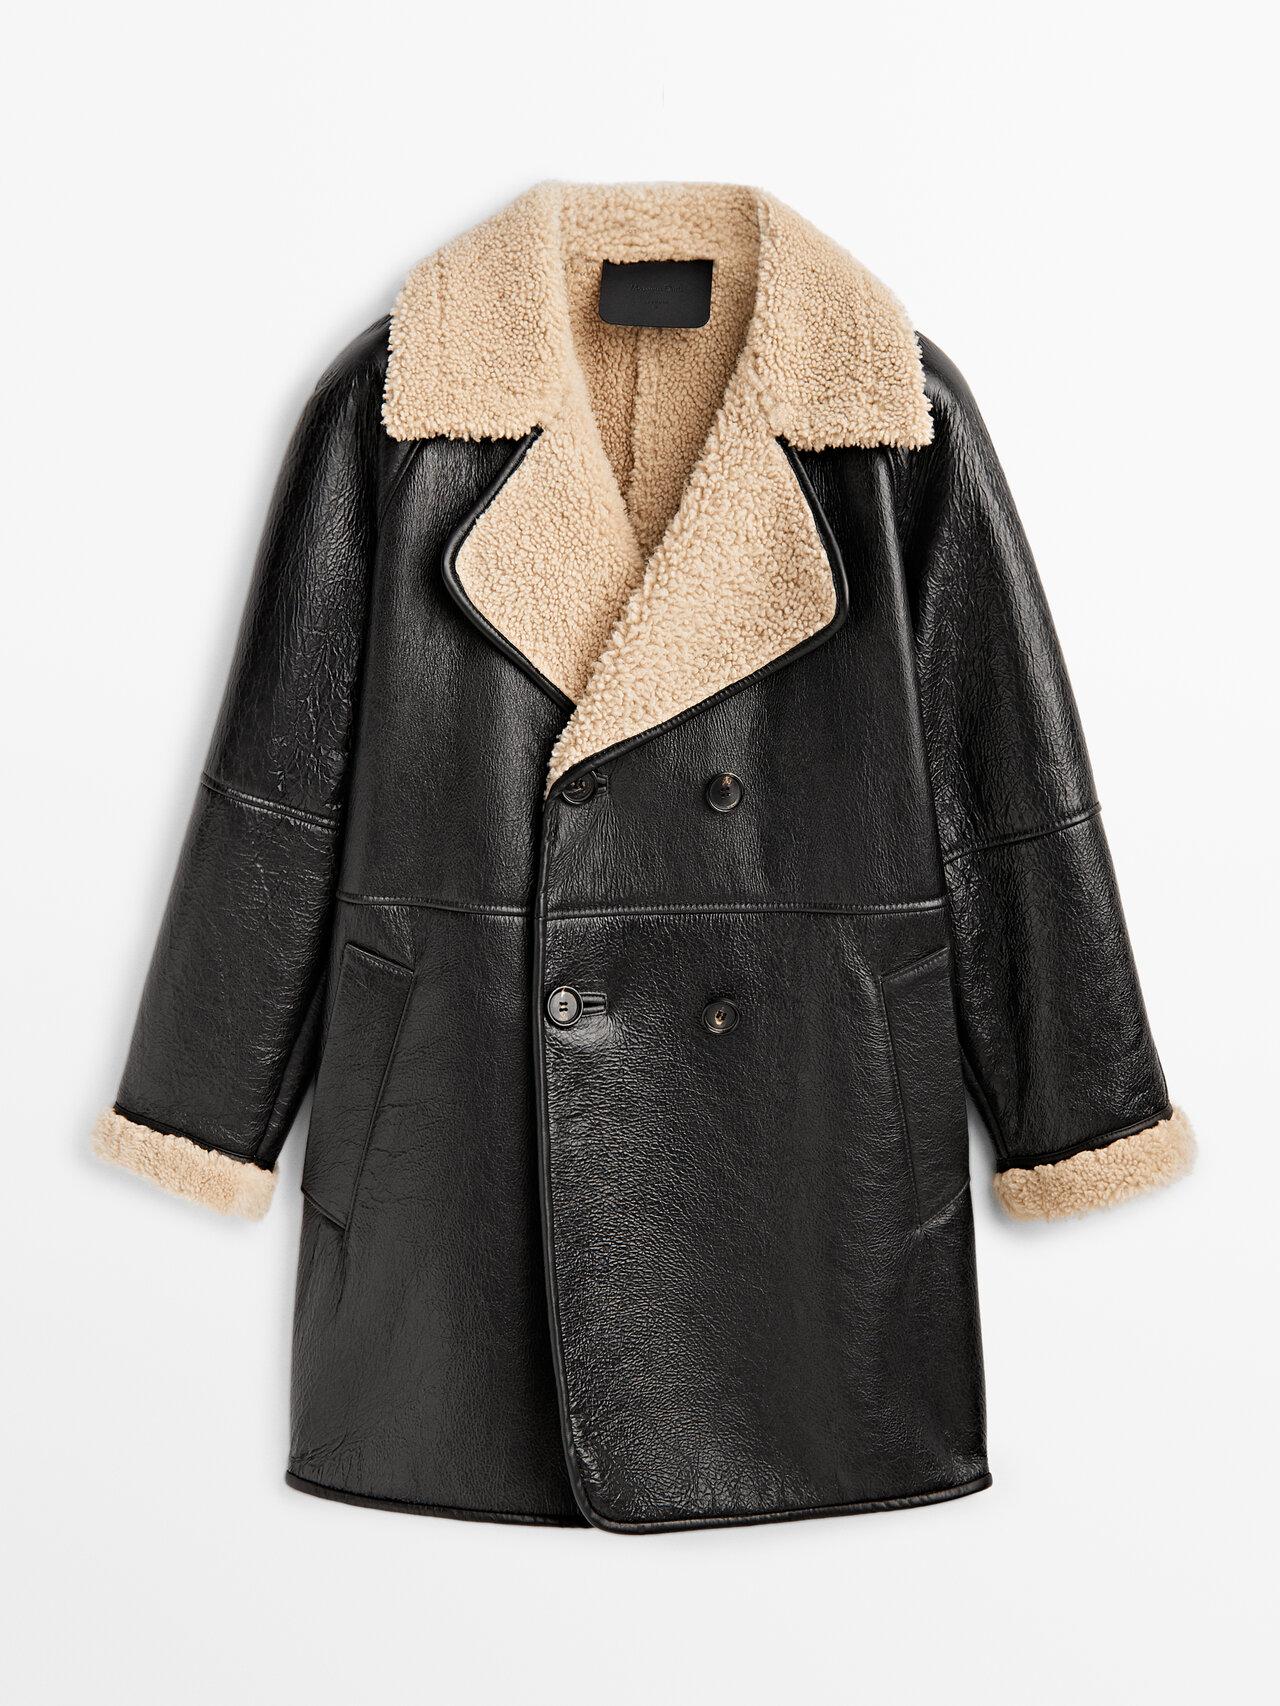 MASSIMO DUTTI Mouton Leather Coat With Crackled Finish in Black | Lyst